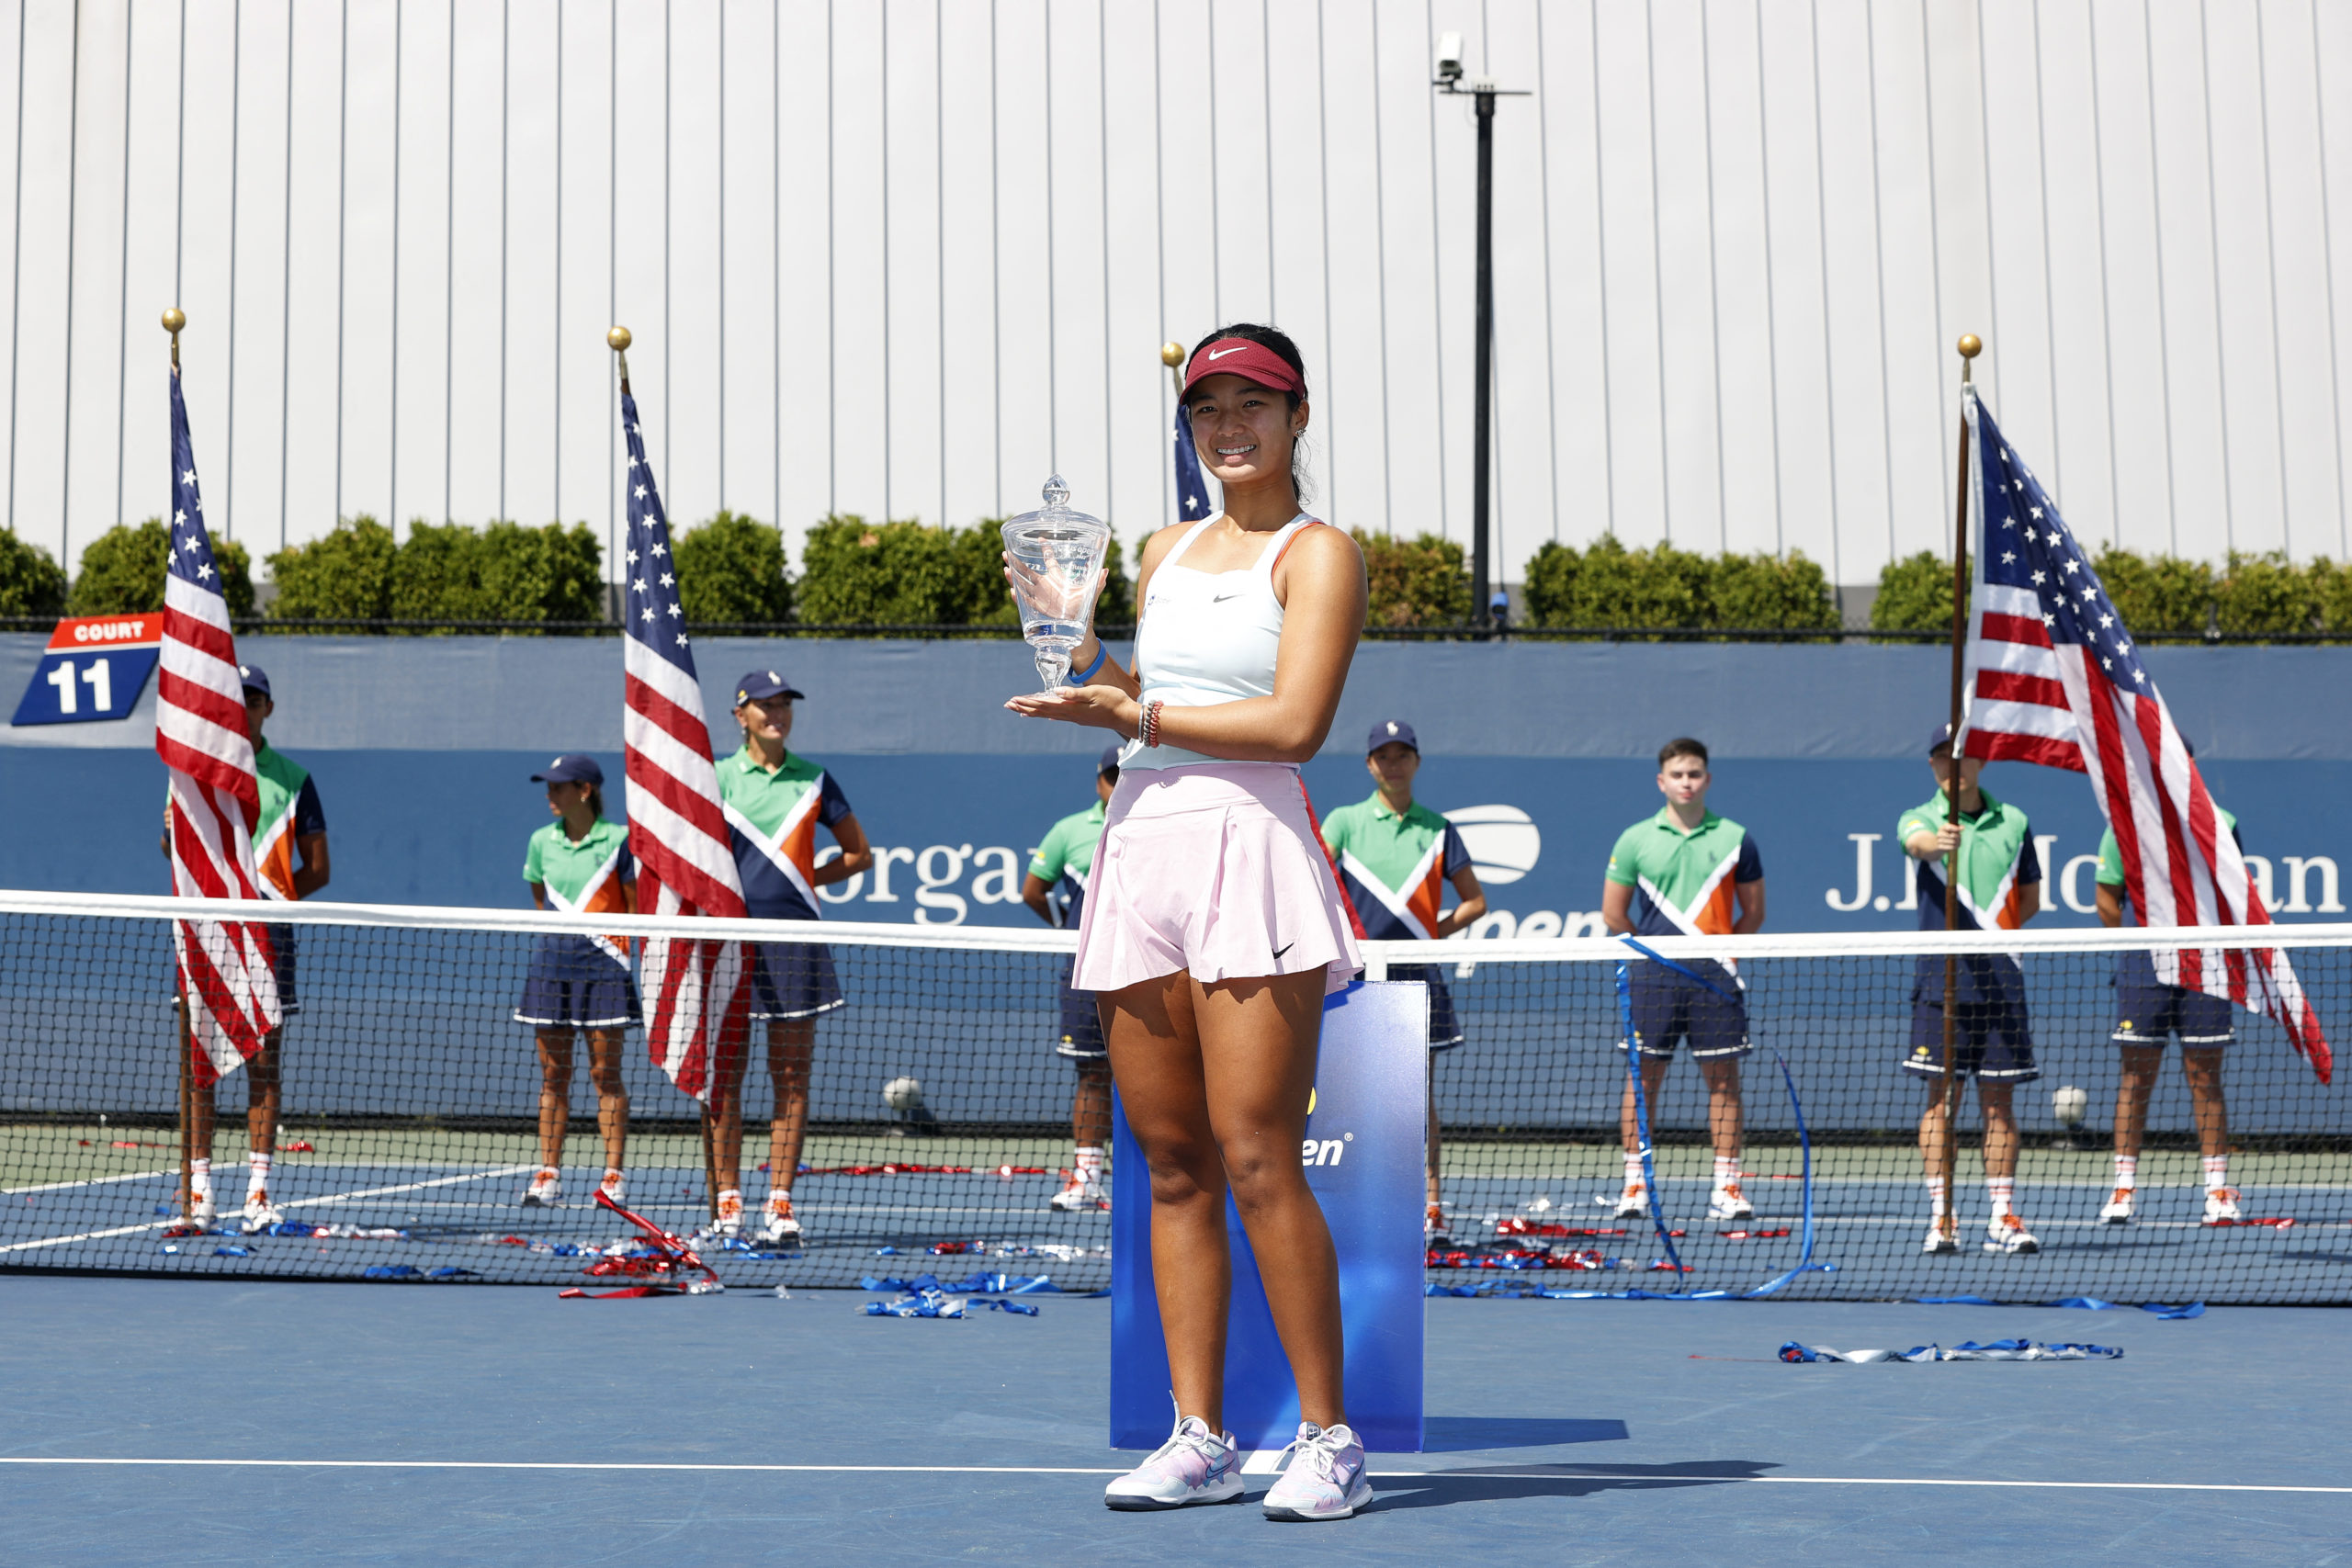 Alexandra Eala of Philippines celebrates with the championship trophy after defeating Lucie Havlickova of Czech Republic during their Junior Girl's Singles Final match on Day Thirteen of the 2022 US Open at USTA Billie Jean King National Tennis Center on September 10, 2022 in the Flushing neighborhood of the Queens borough of New York City.